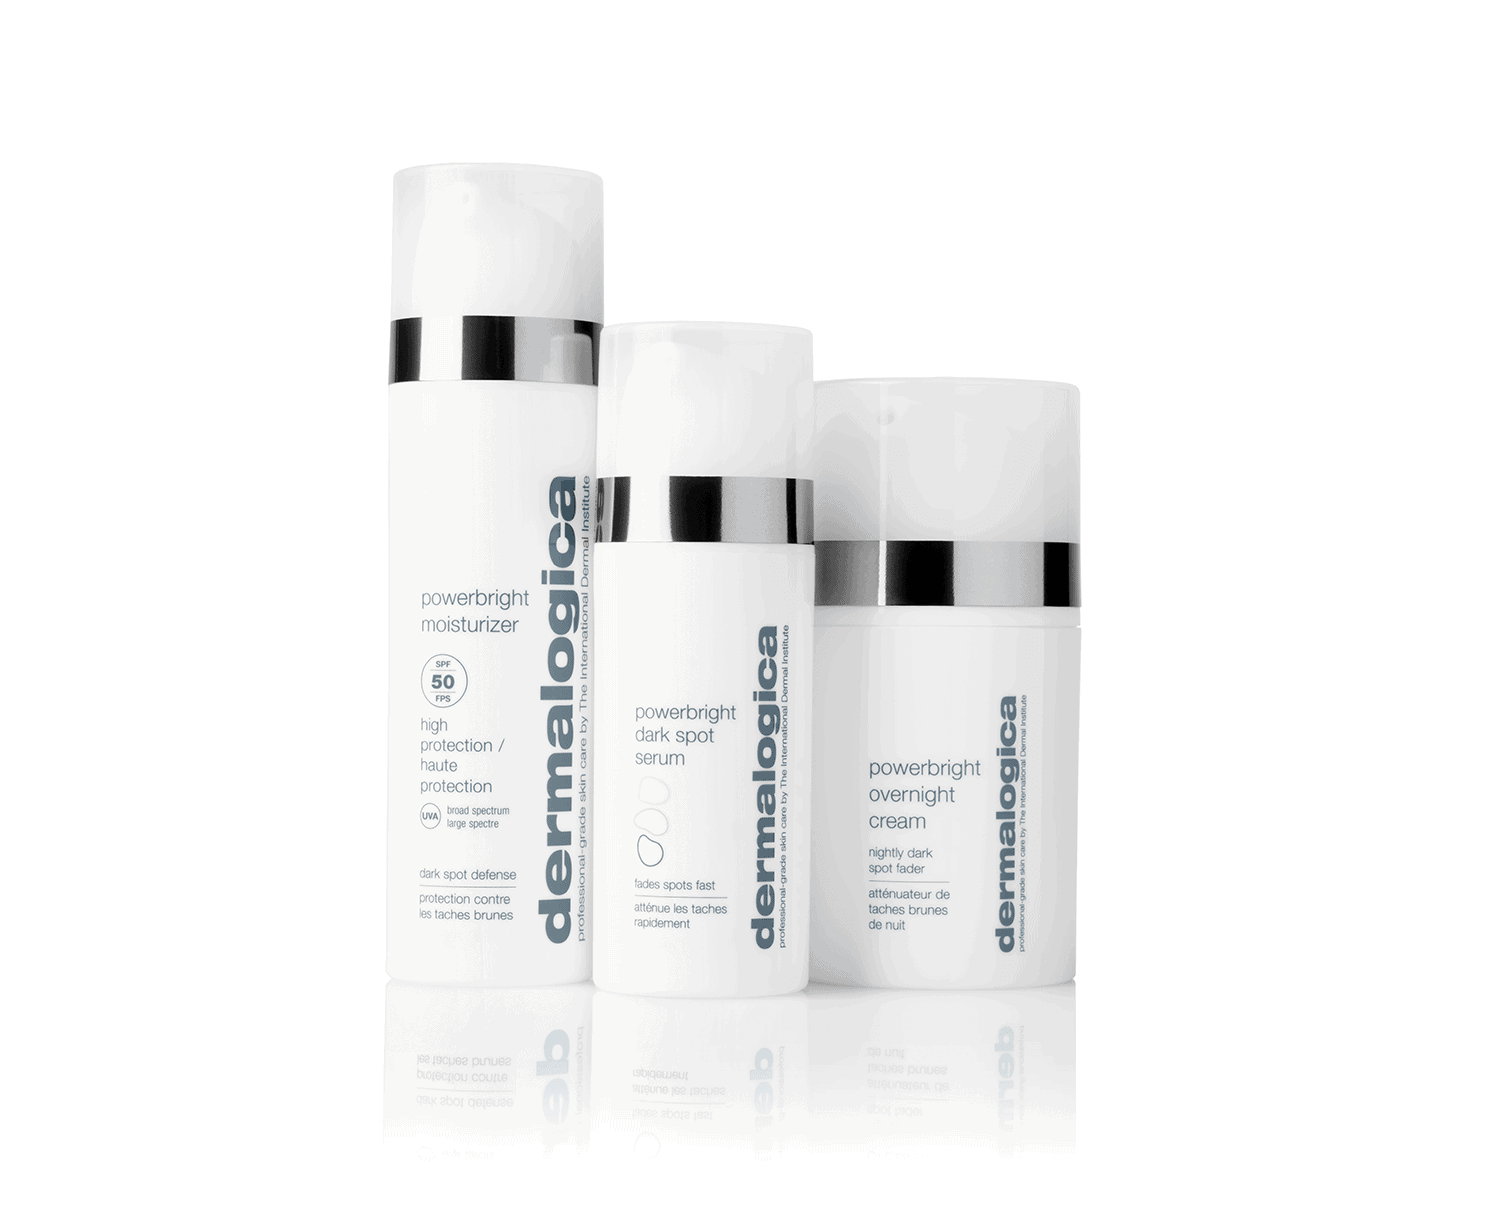 Dermalogica skin care products displayed on a white background.